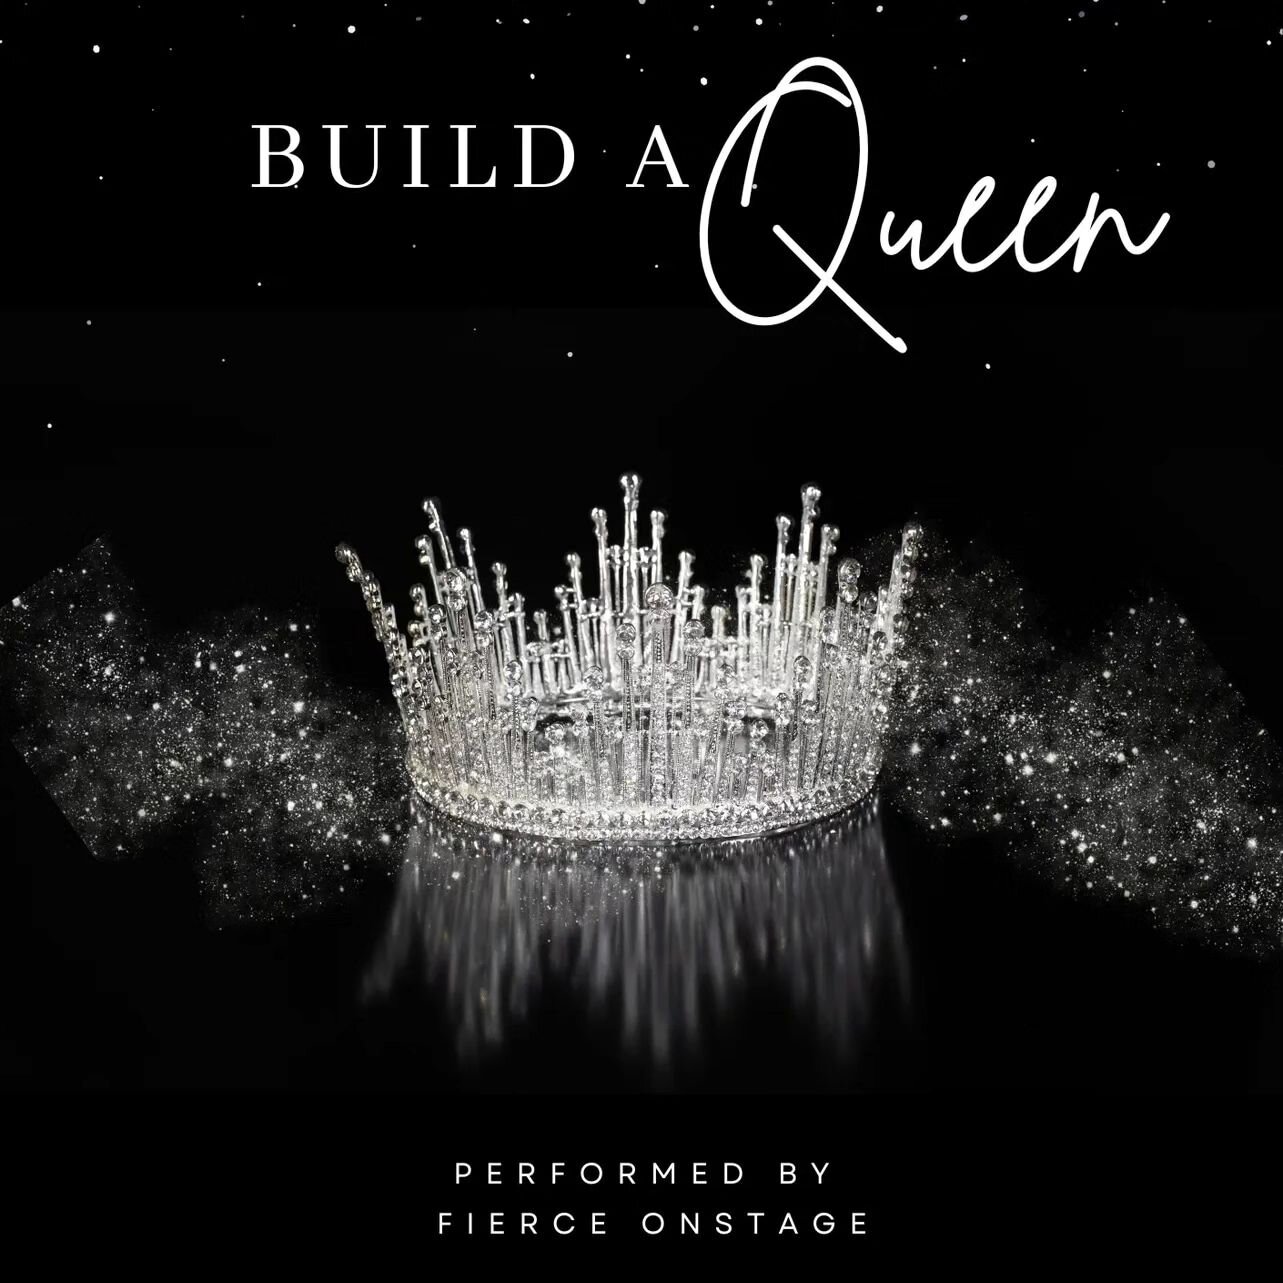 ***Fierce OnStage Presents: Build A Queen LIVE Stage Show!***

Join us on a journey as we watch these fantastic dancers take to the stage and go through the story of building up an amazing Queen!

Date: May 13th, 2023

Where: Cardel Theatre - 180 Qua